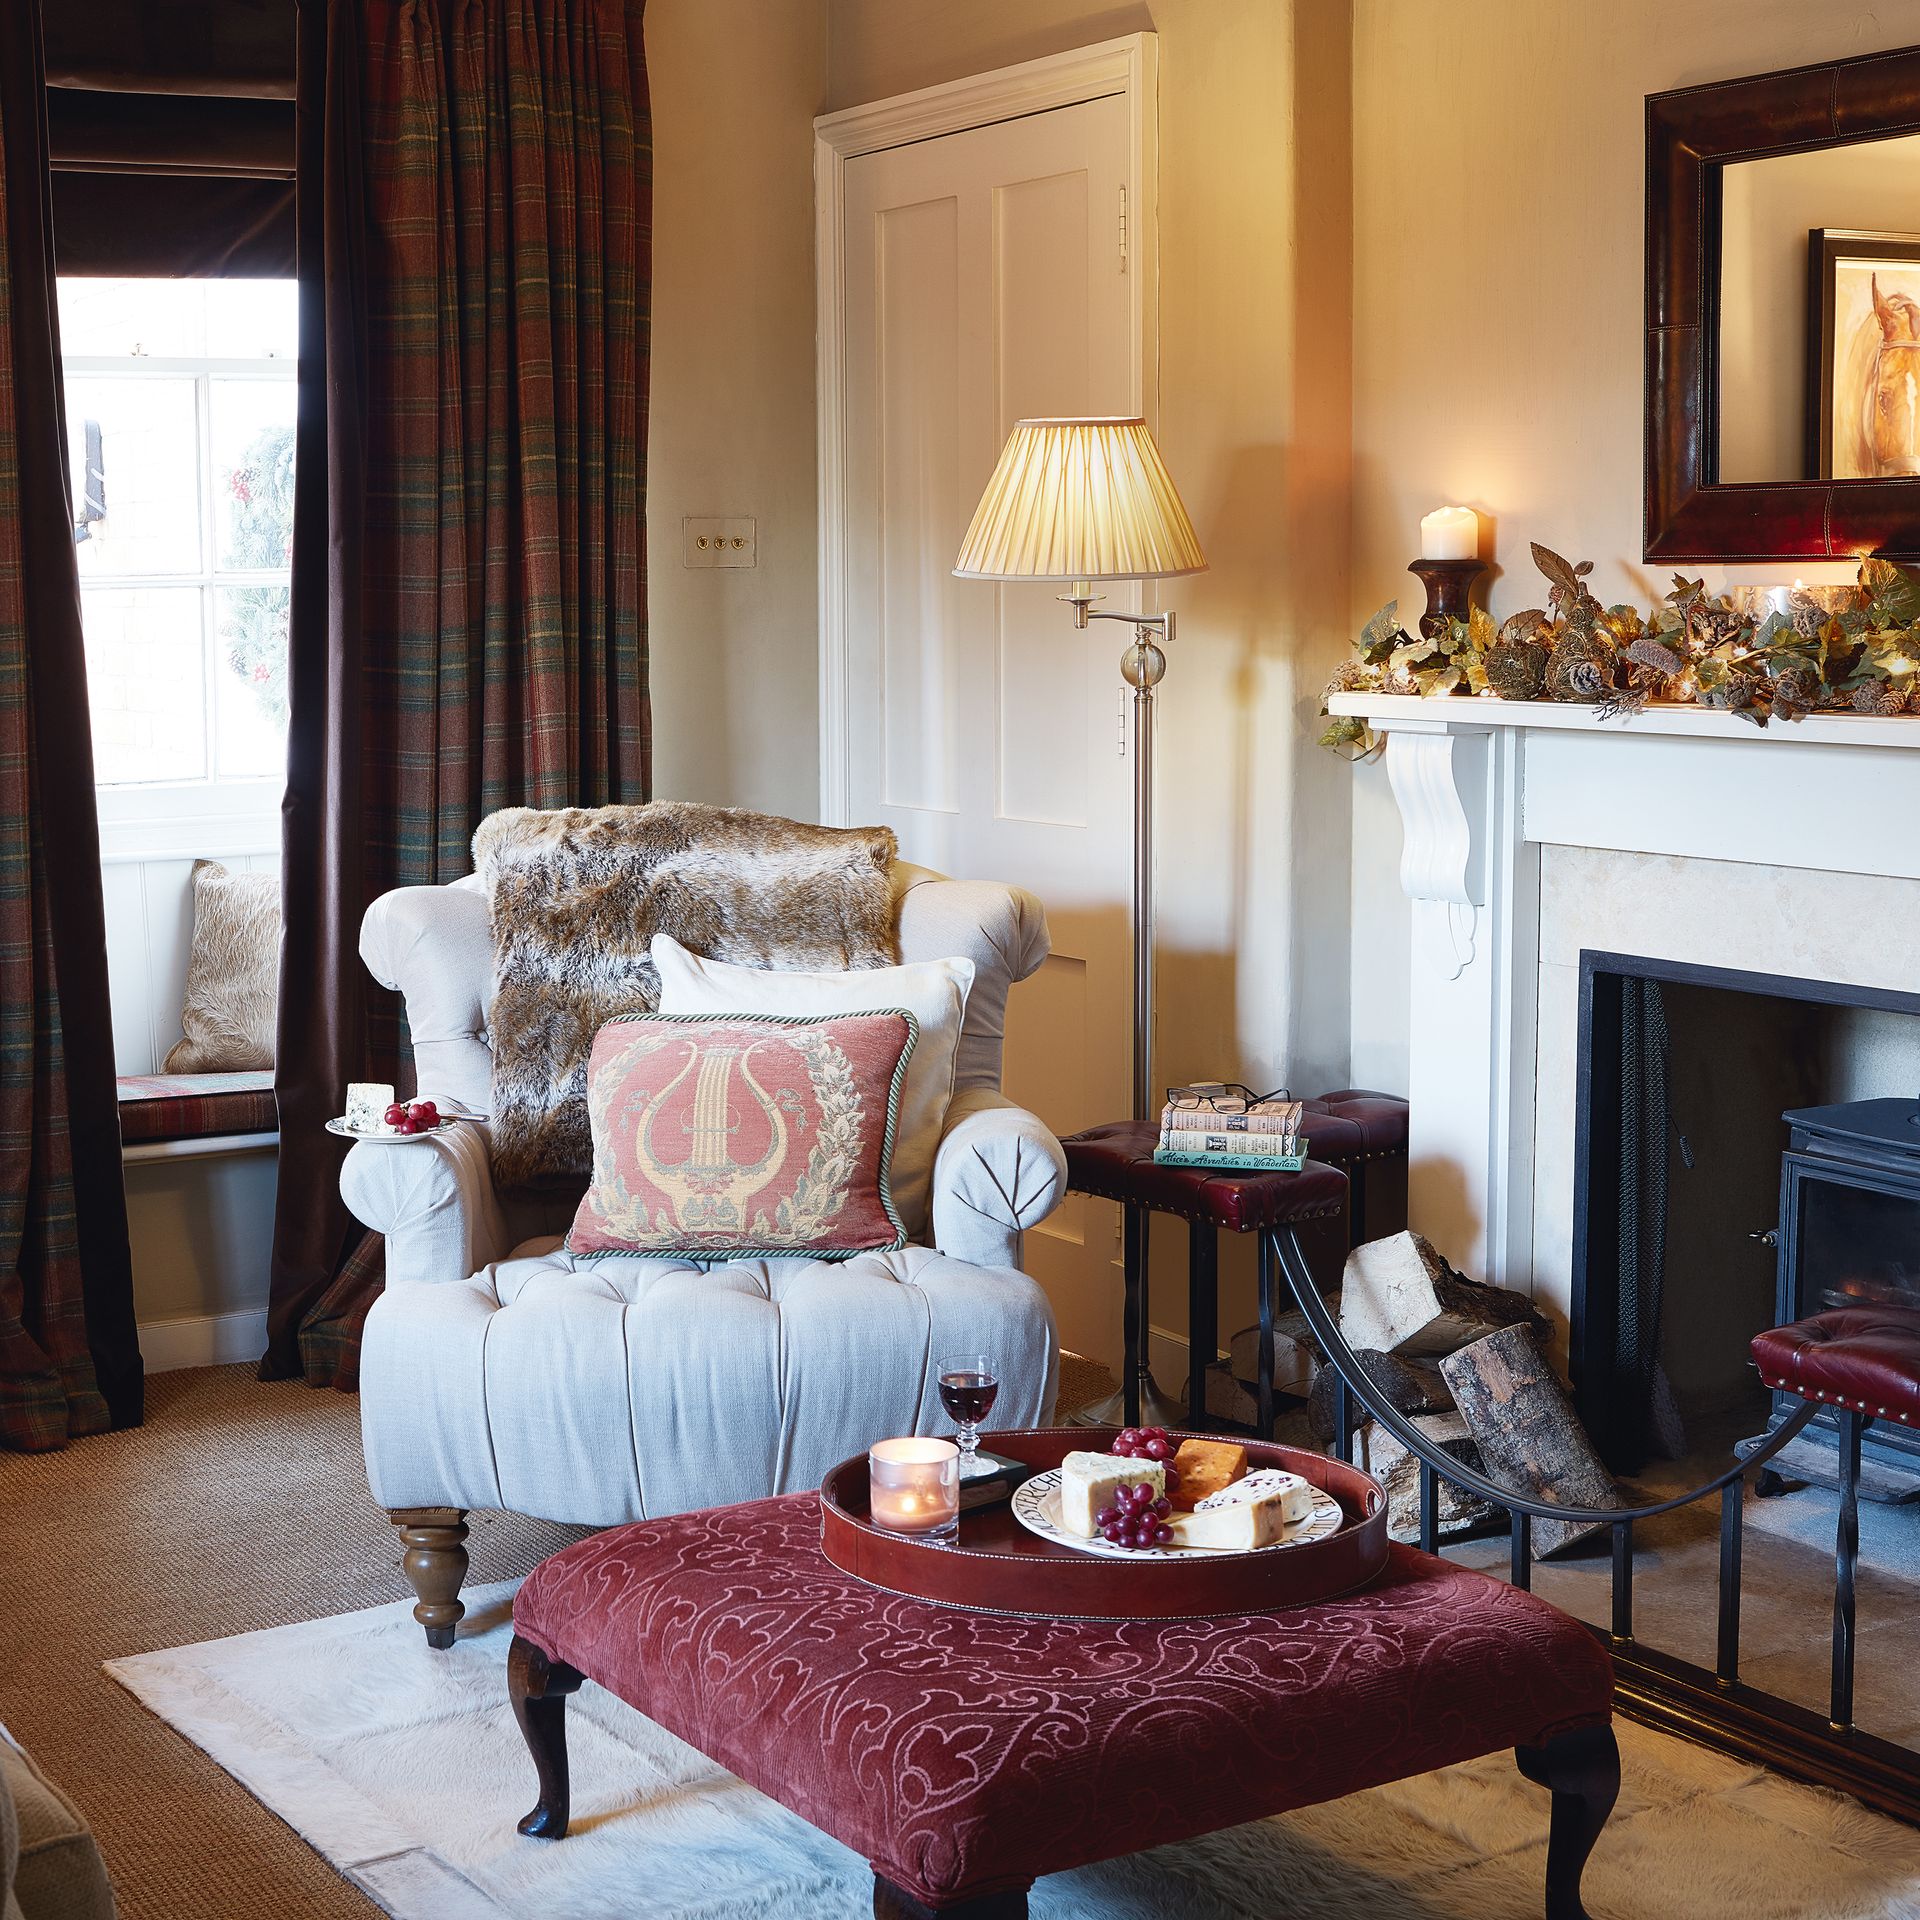 Christmas house: an elegant Queen Anne home in the country | Real Homes